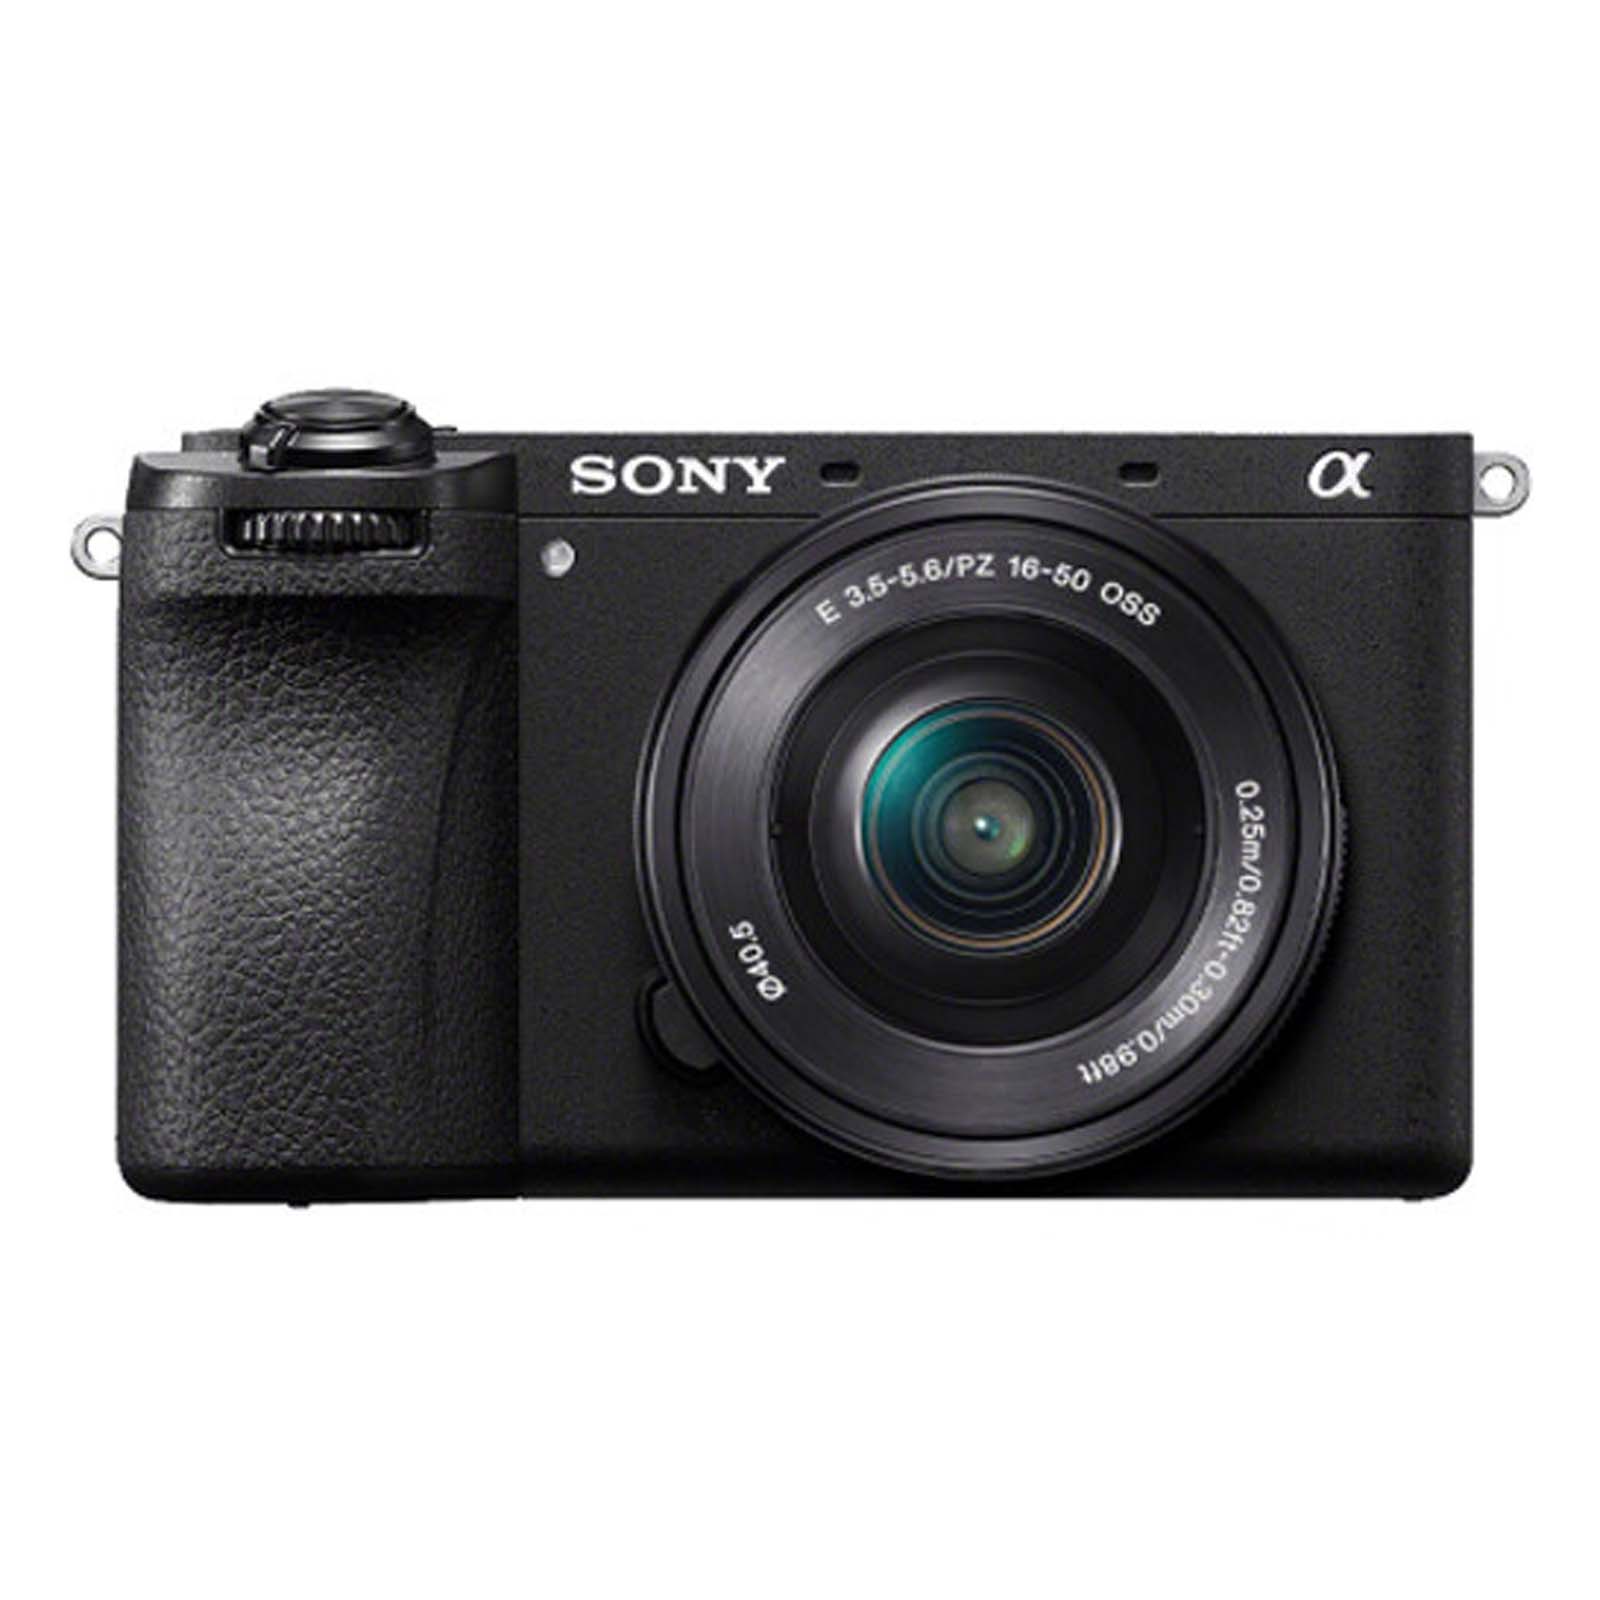 Image of Sony A6700 Digital Camera Body with 1650mm Power Zoom Lens